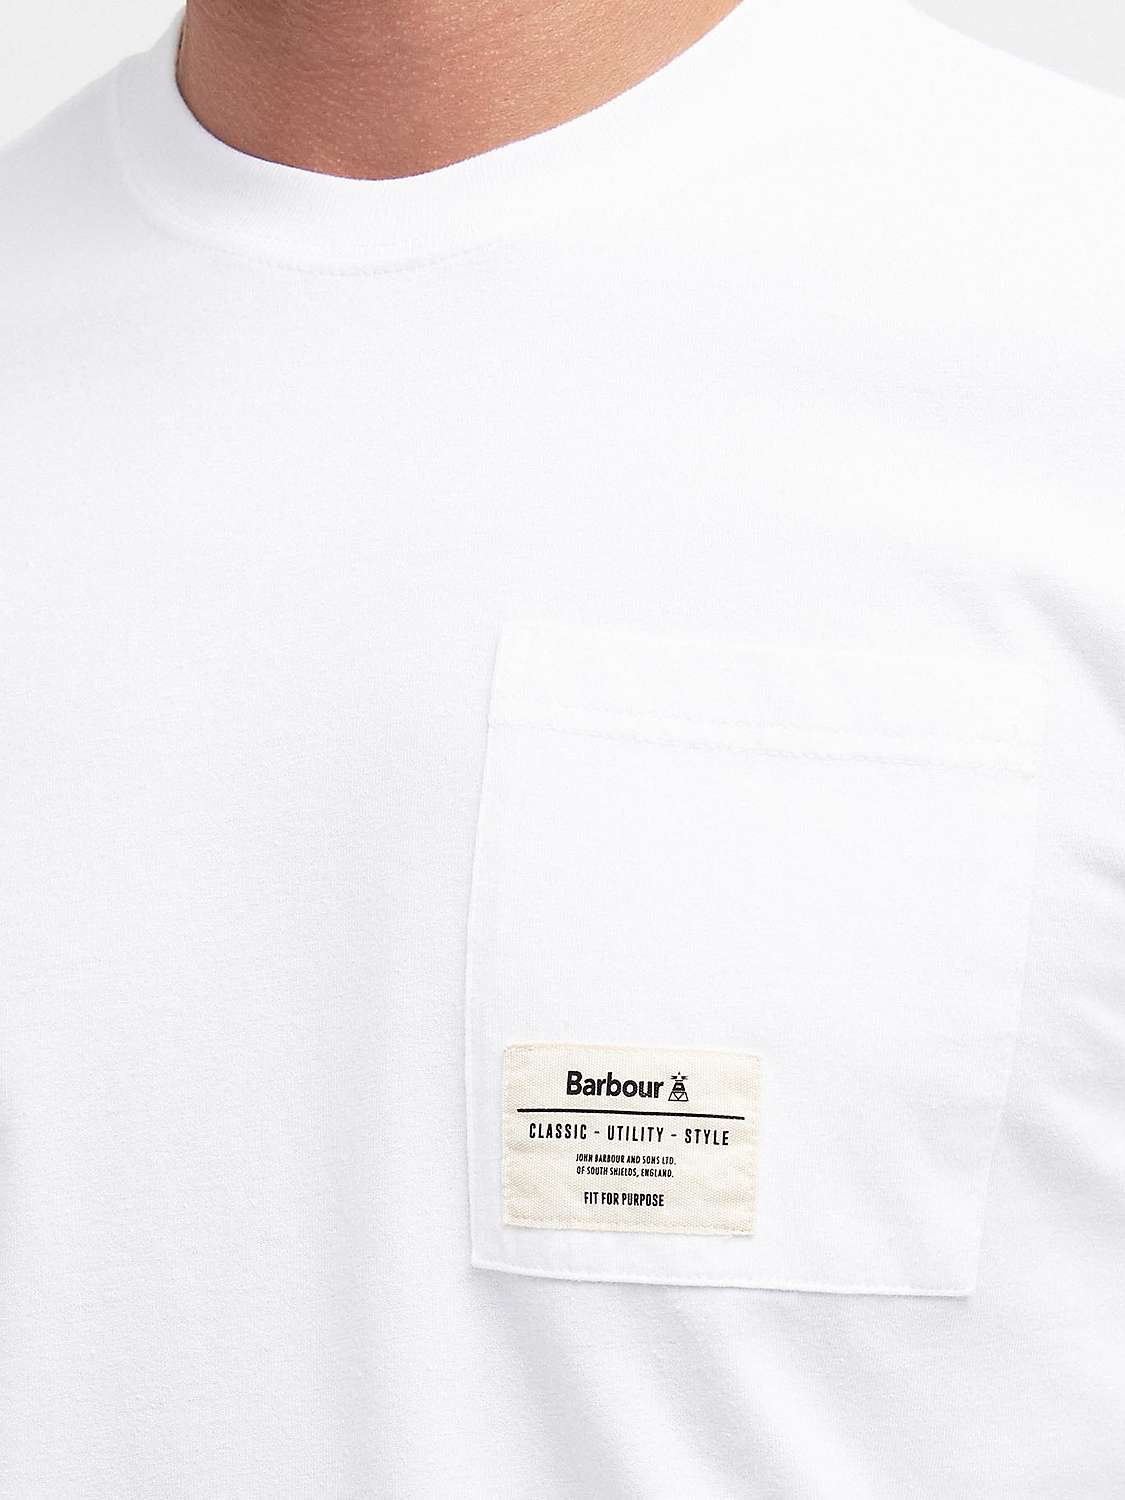 Buy Barbour Holbeck Long Sleeve T-Shirt, White Online at johnlewis.com